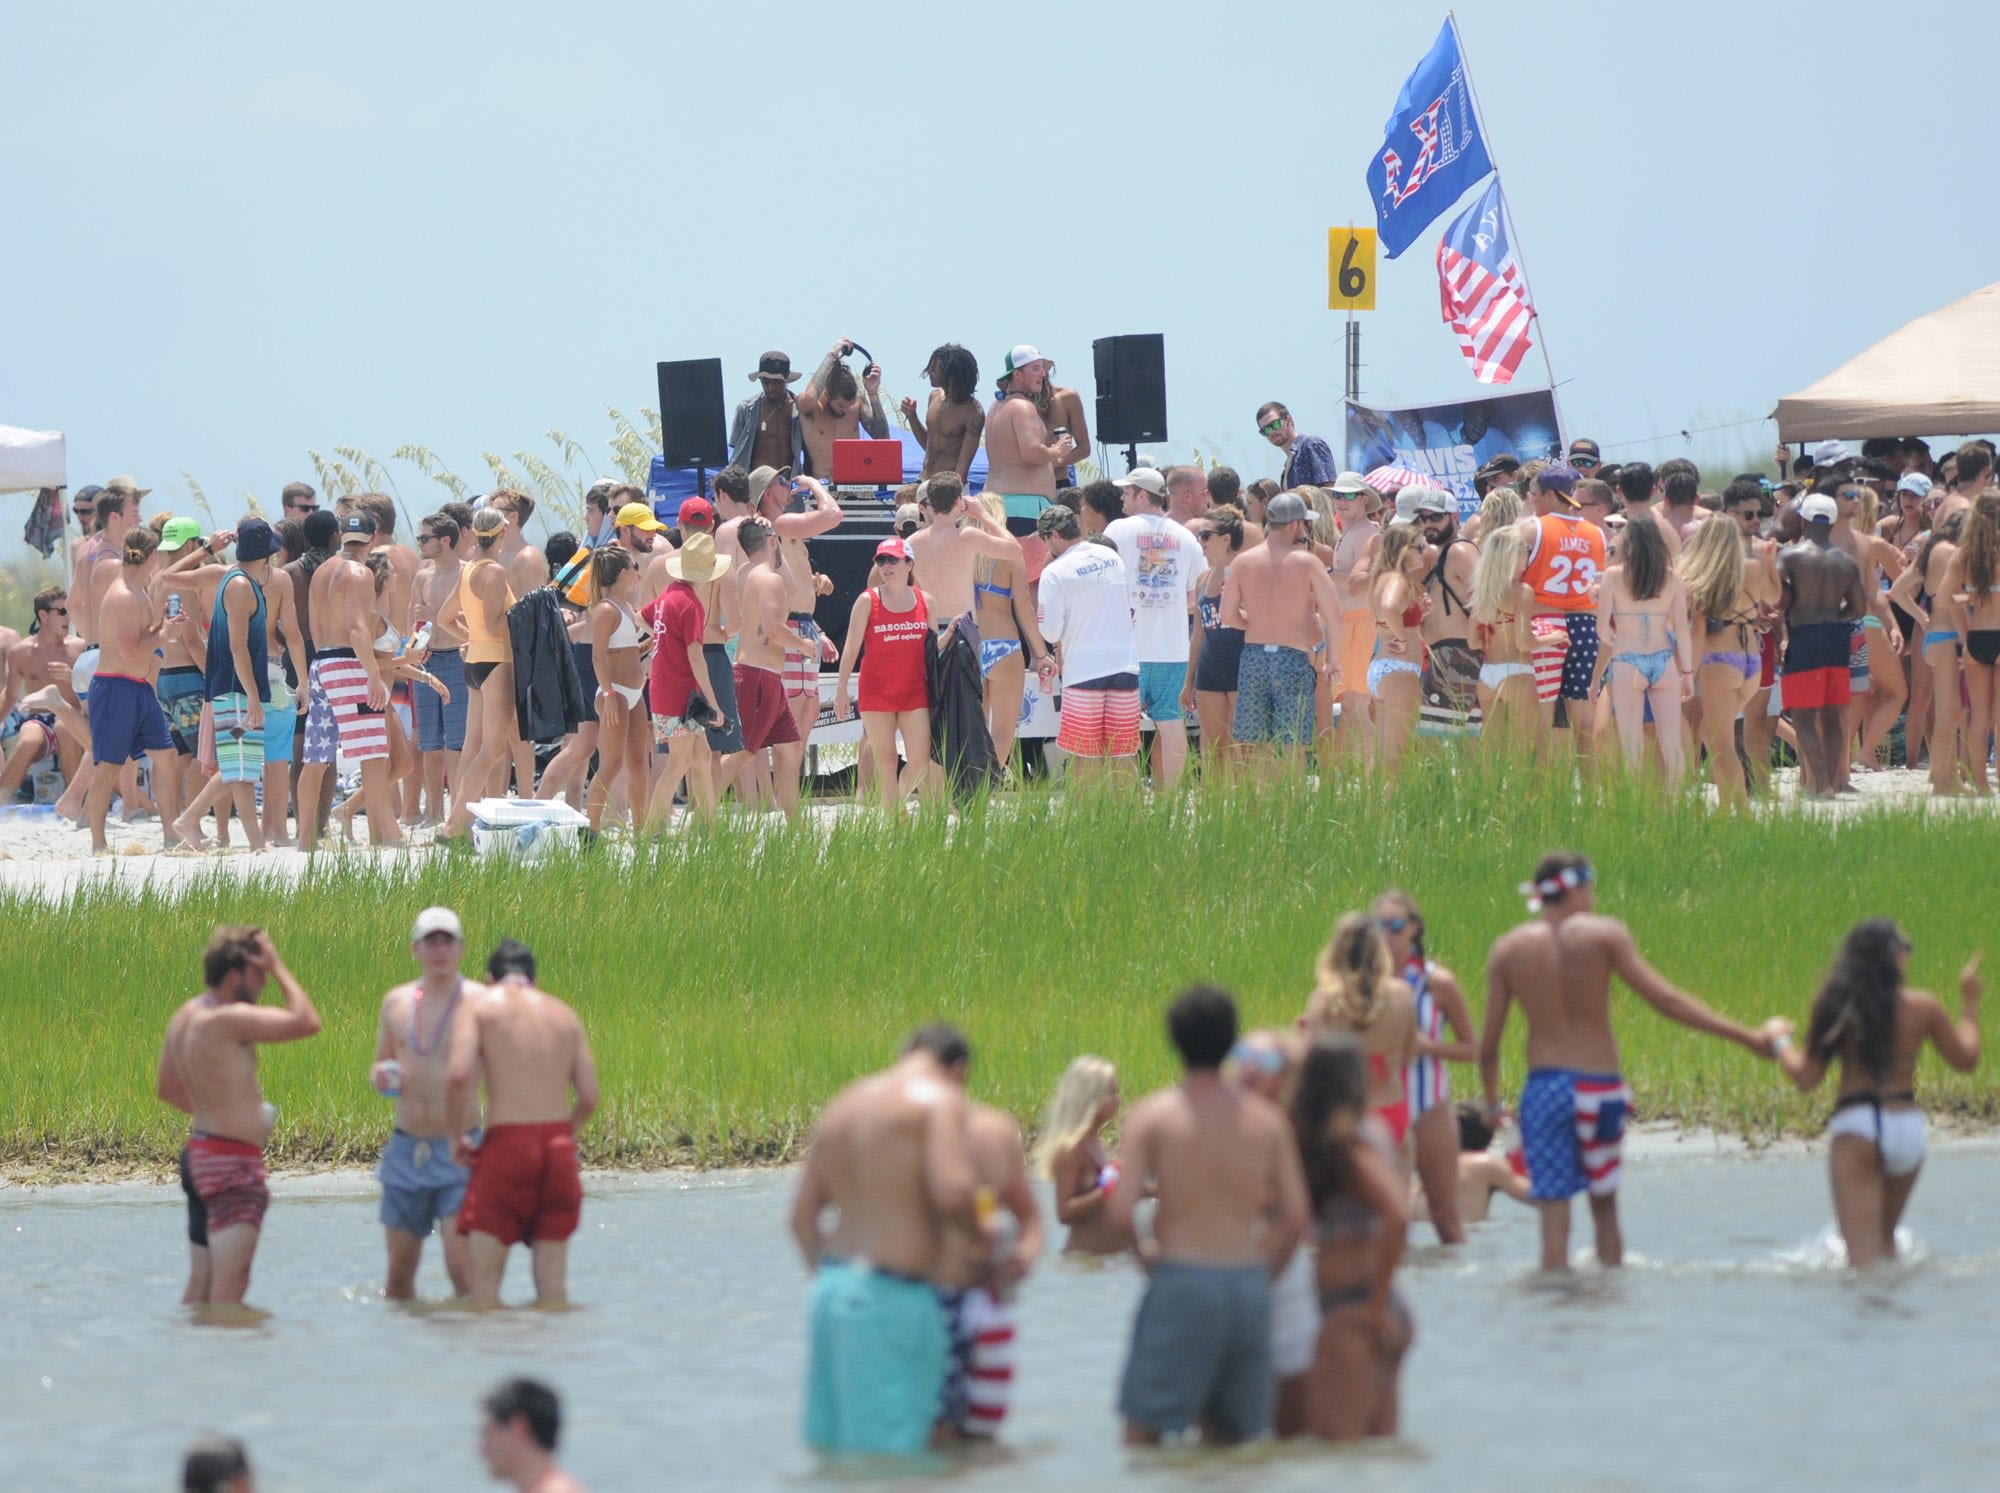 Masonboro Island attracts thousands on July 4. Here's a look at its history and preservation.